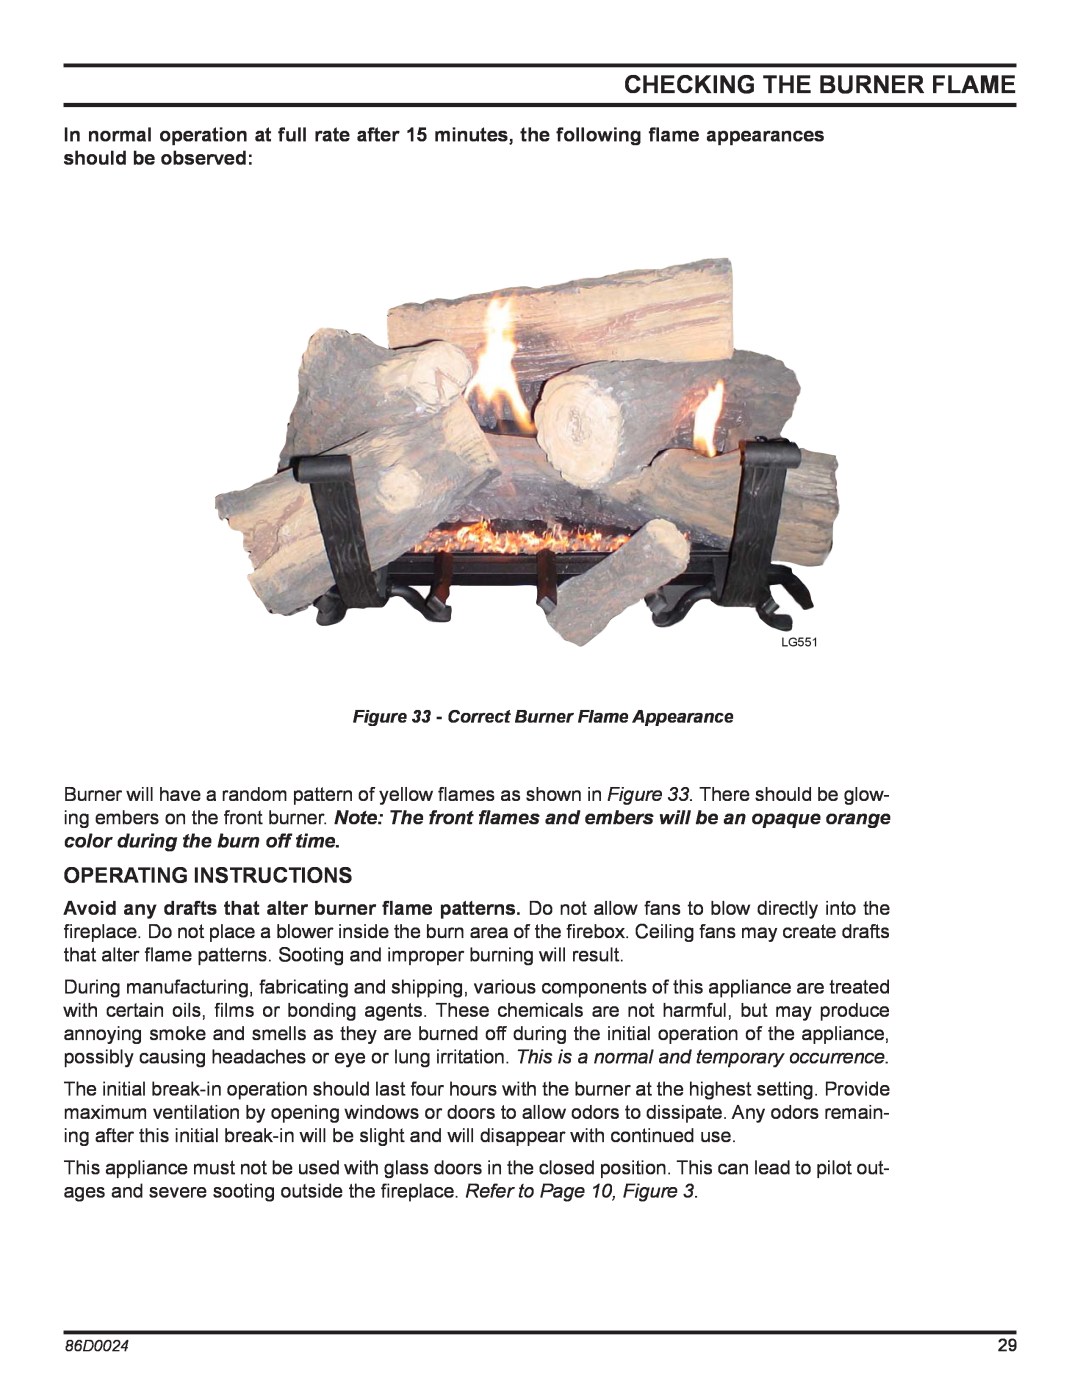 Monessen Hearth MJ27PR, MJ27NR operating instructions Checking The Burner Flame, Operating Instructions 